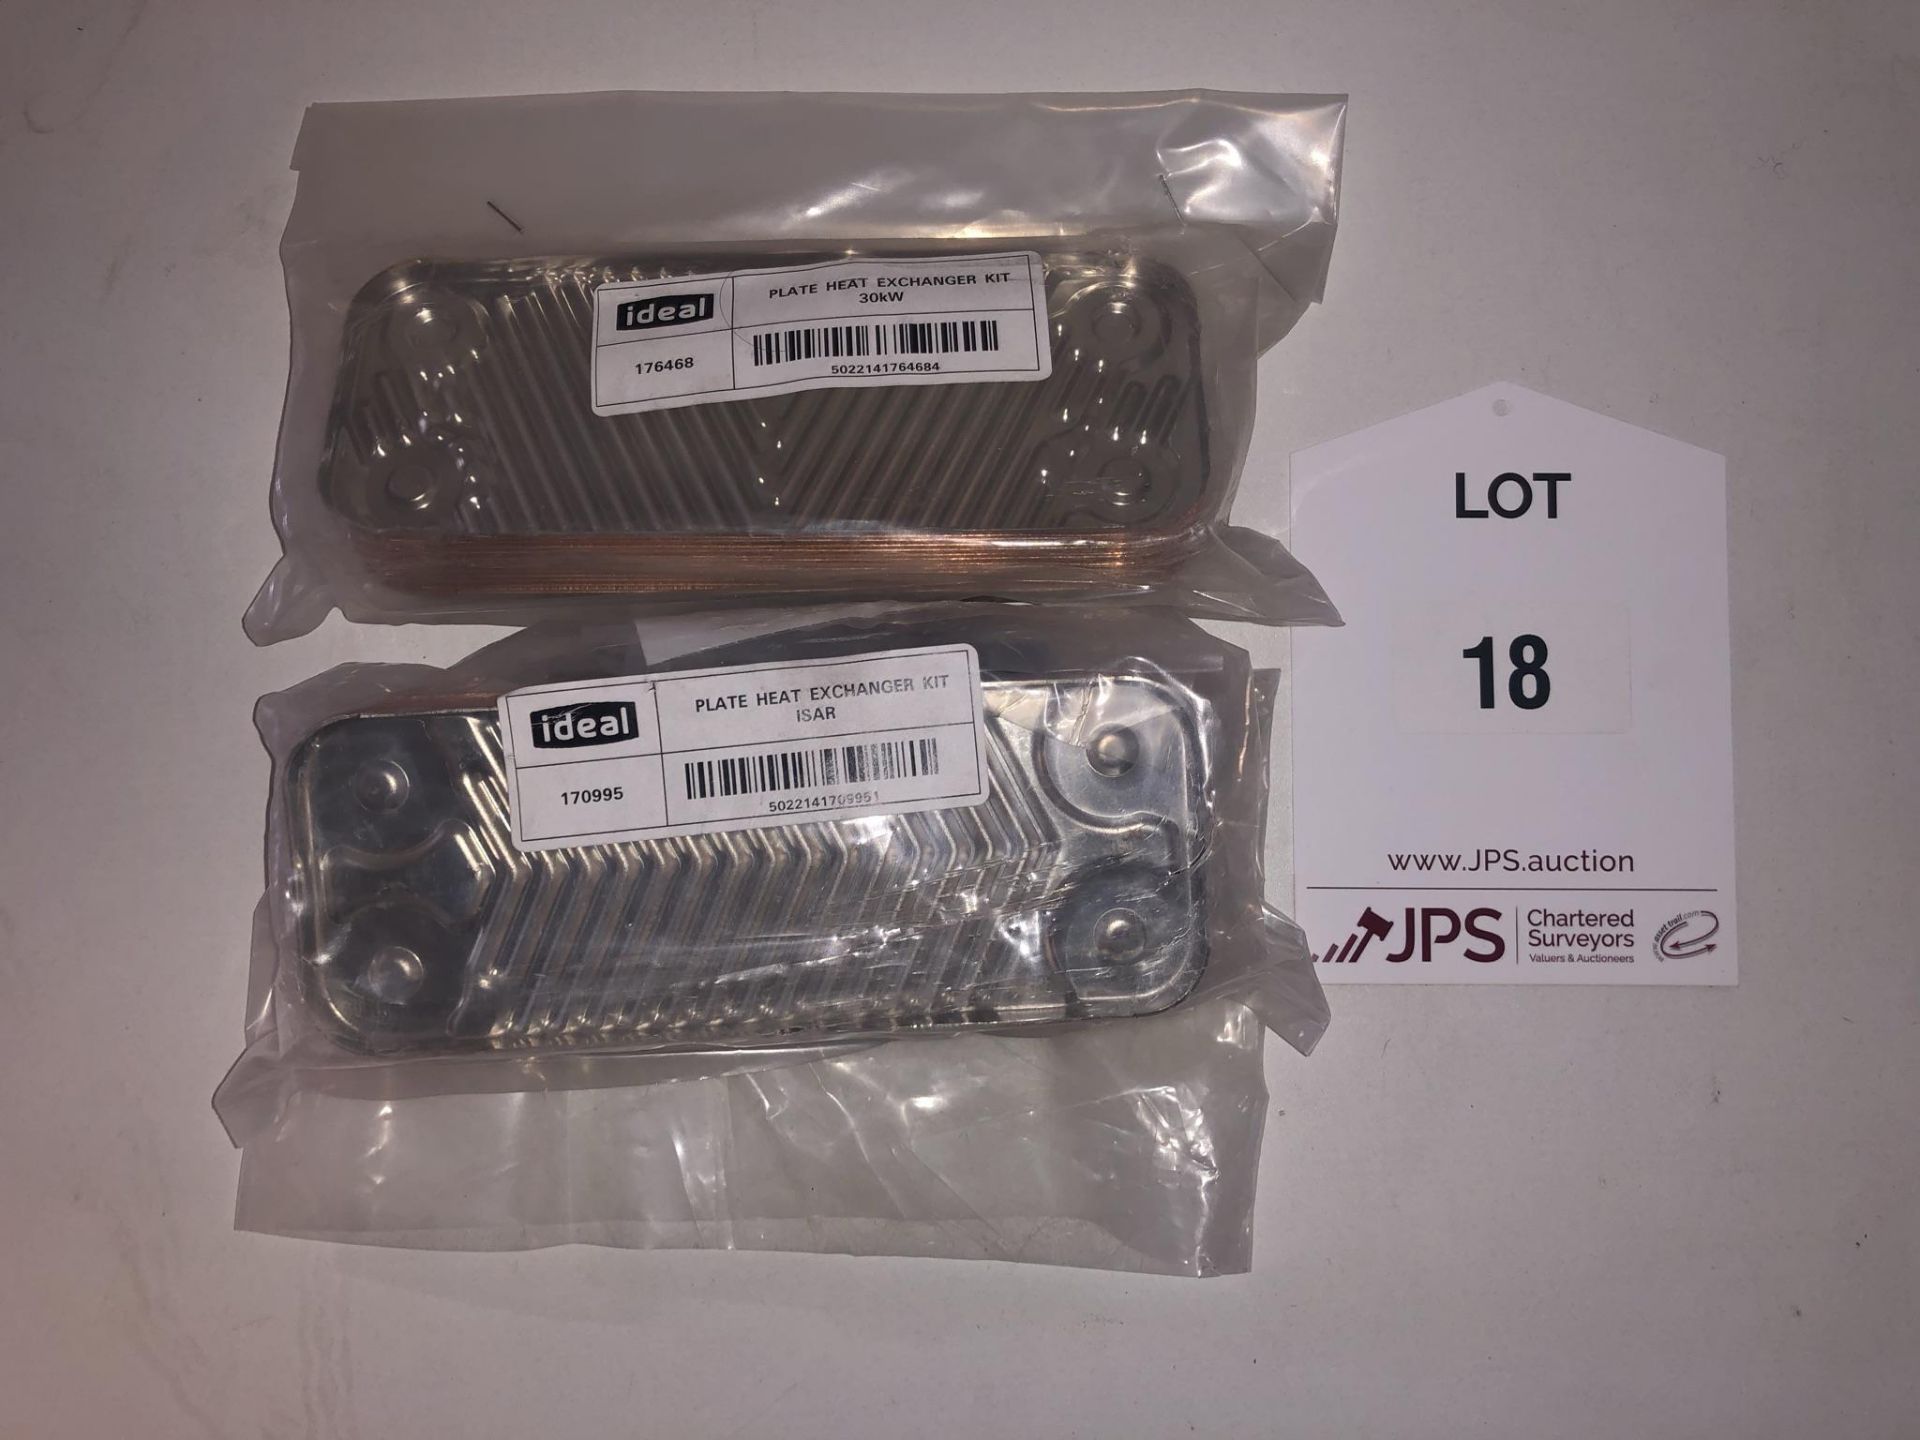 Unused 2 x Ideal 170995 | 176468 plate heat exchanger kits - RRP£160 - Image 2 of 4